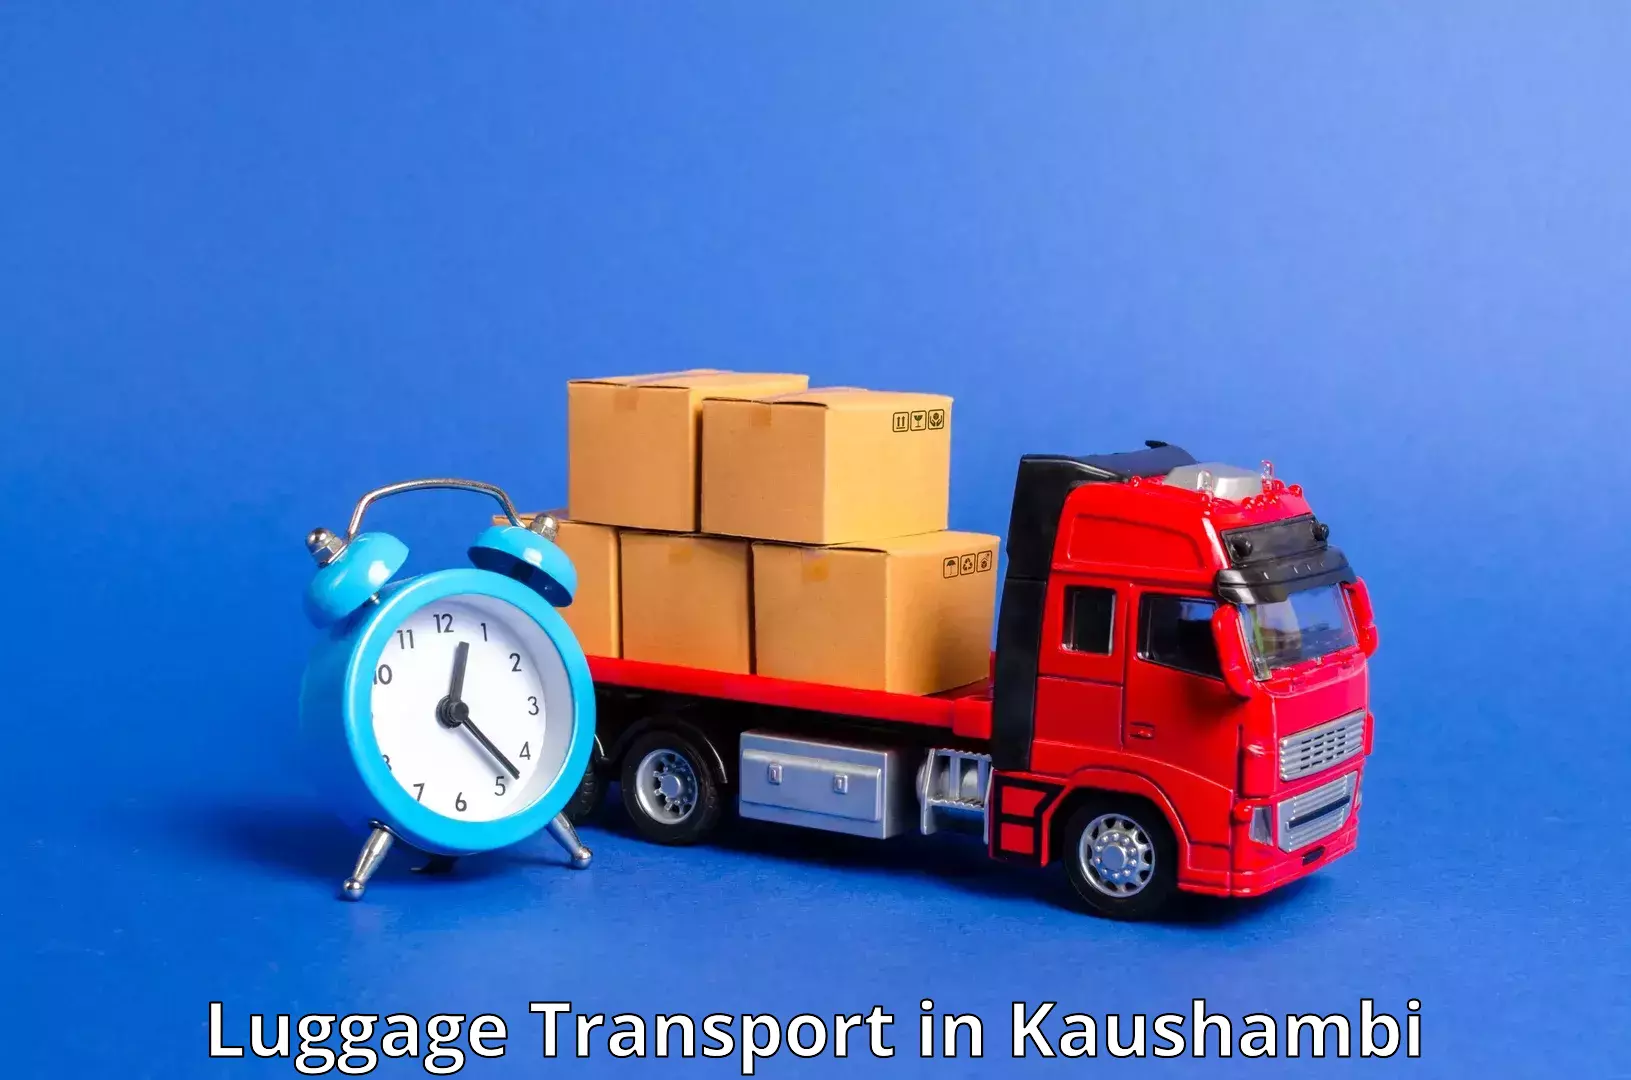 Luggage delivery providers in Kaushambi